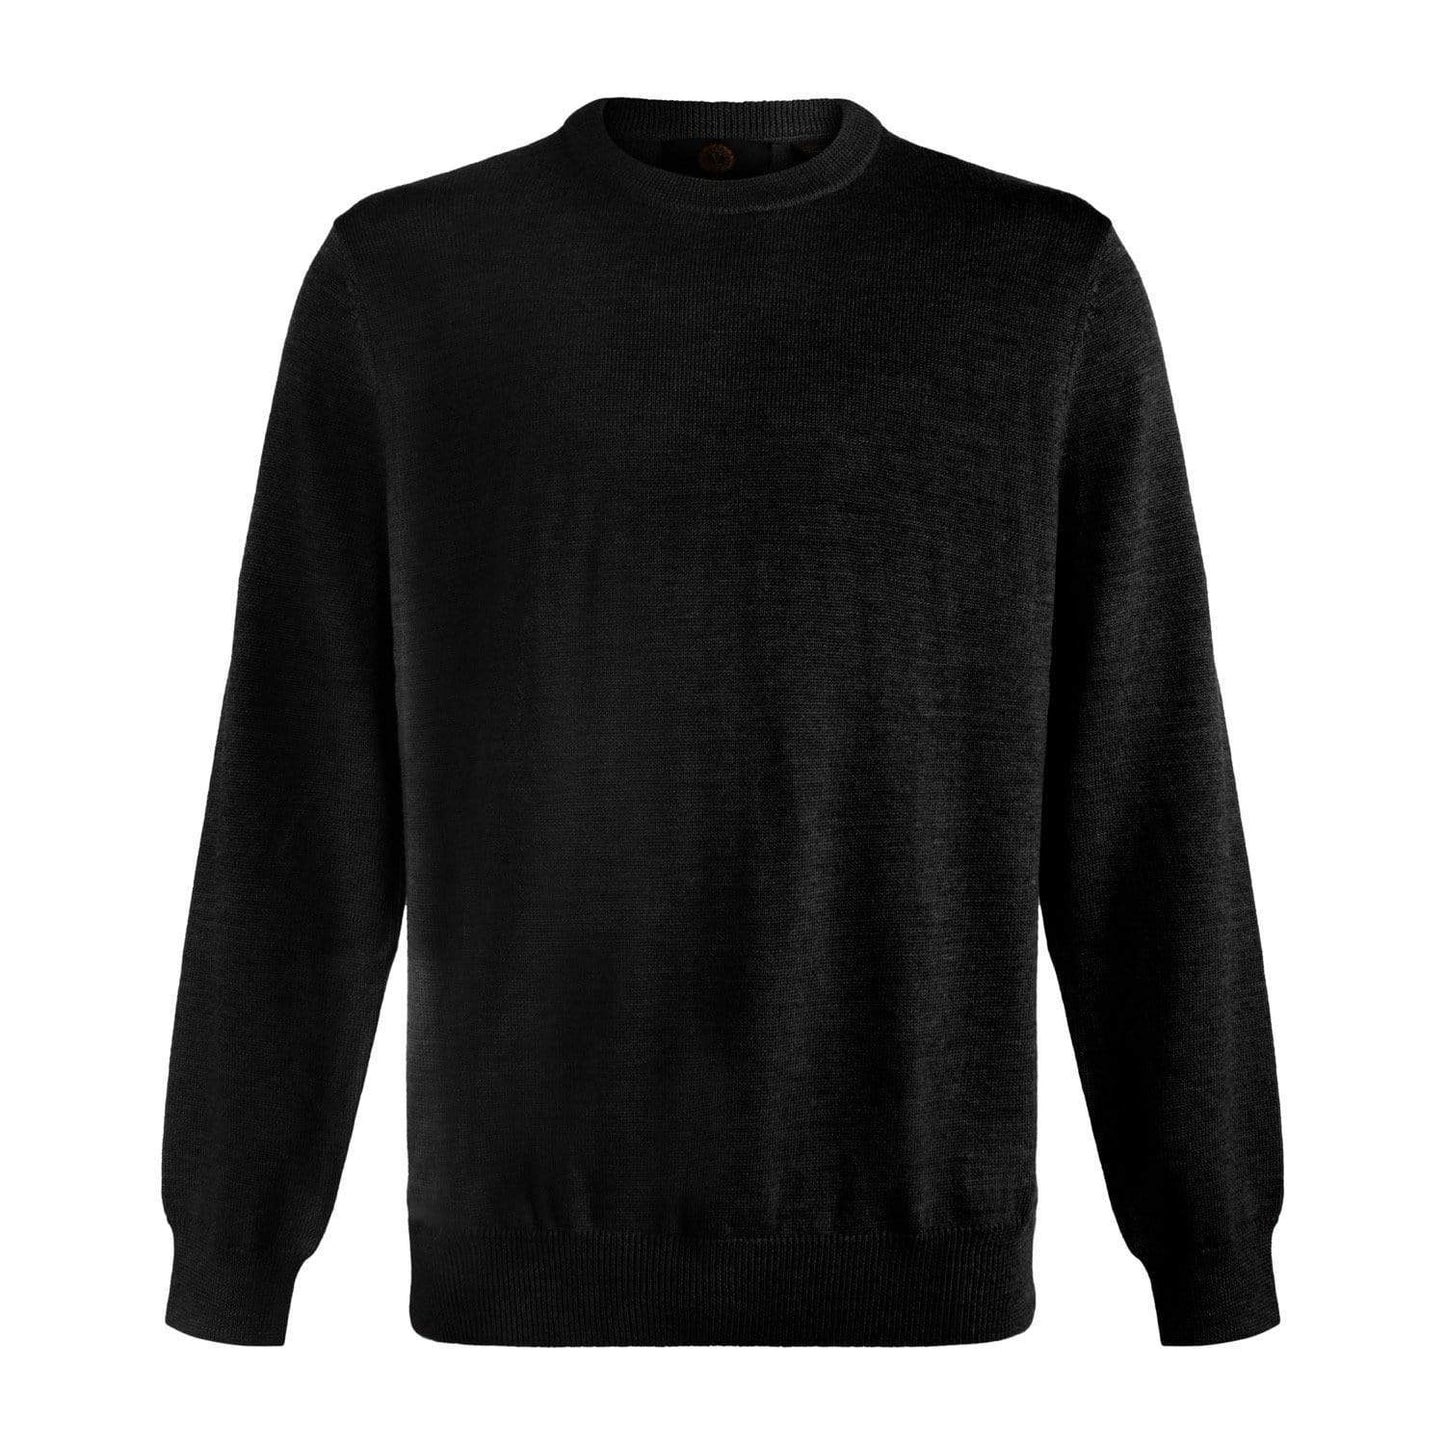 Viyella Elevate Your Wardrobe with Mens Crewneck Extra Fine Merino Wool Sweaters - Available in 7 Fashionable Colors